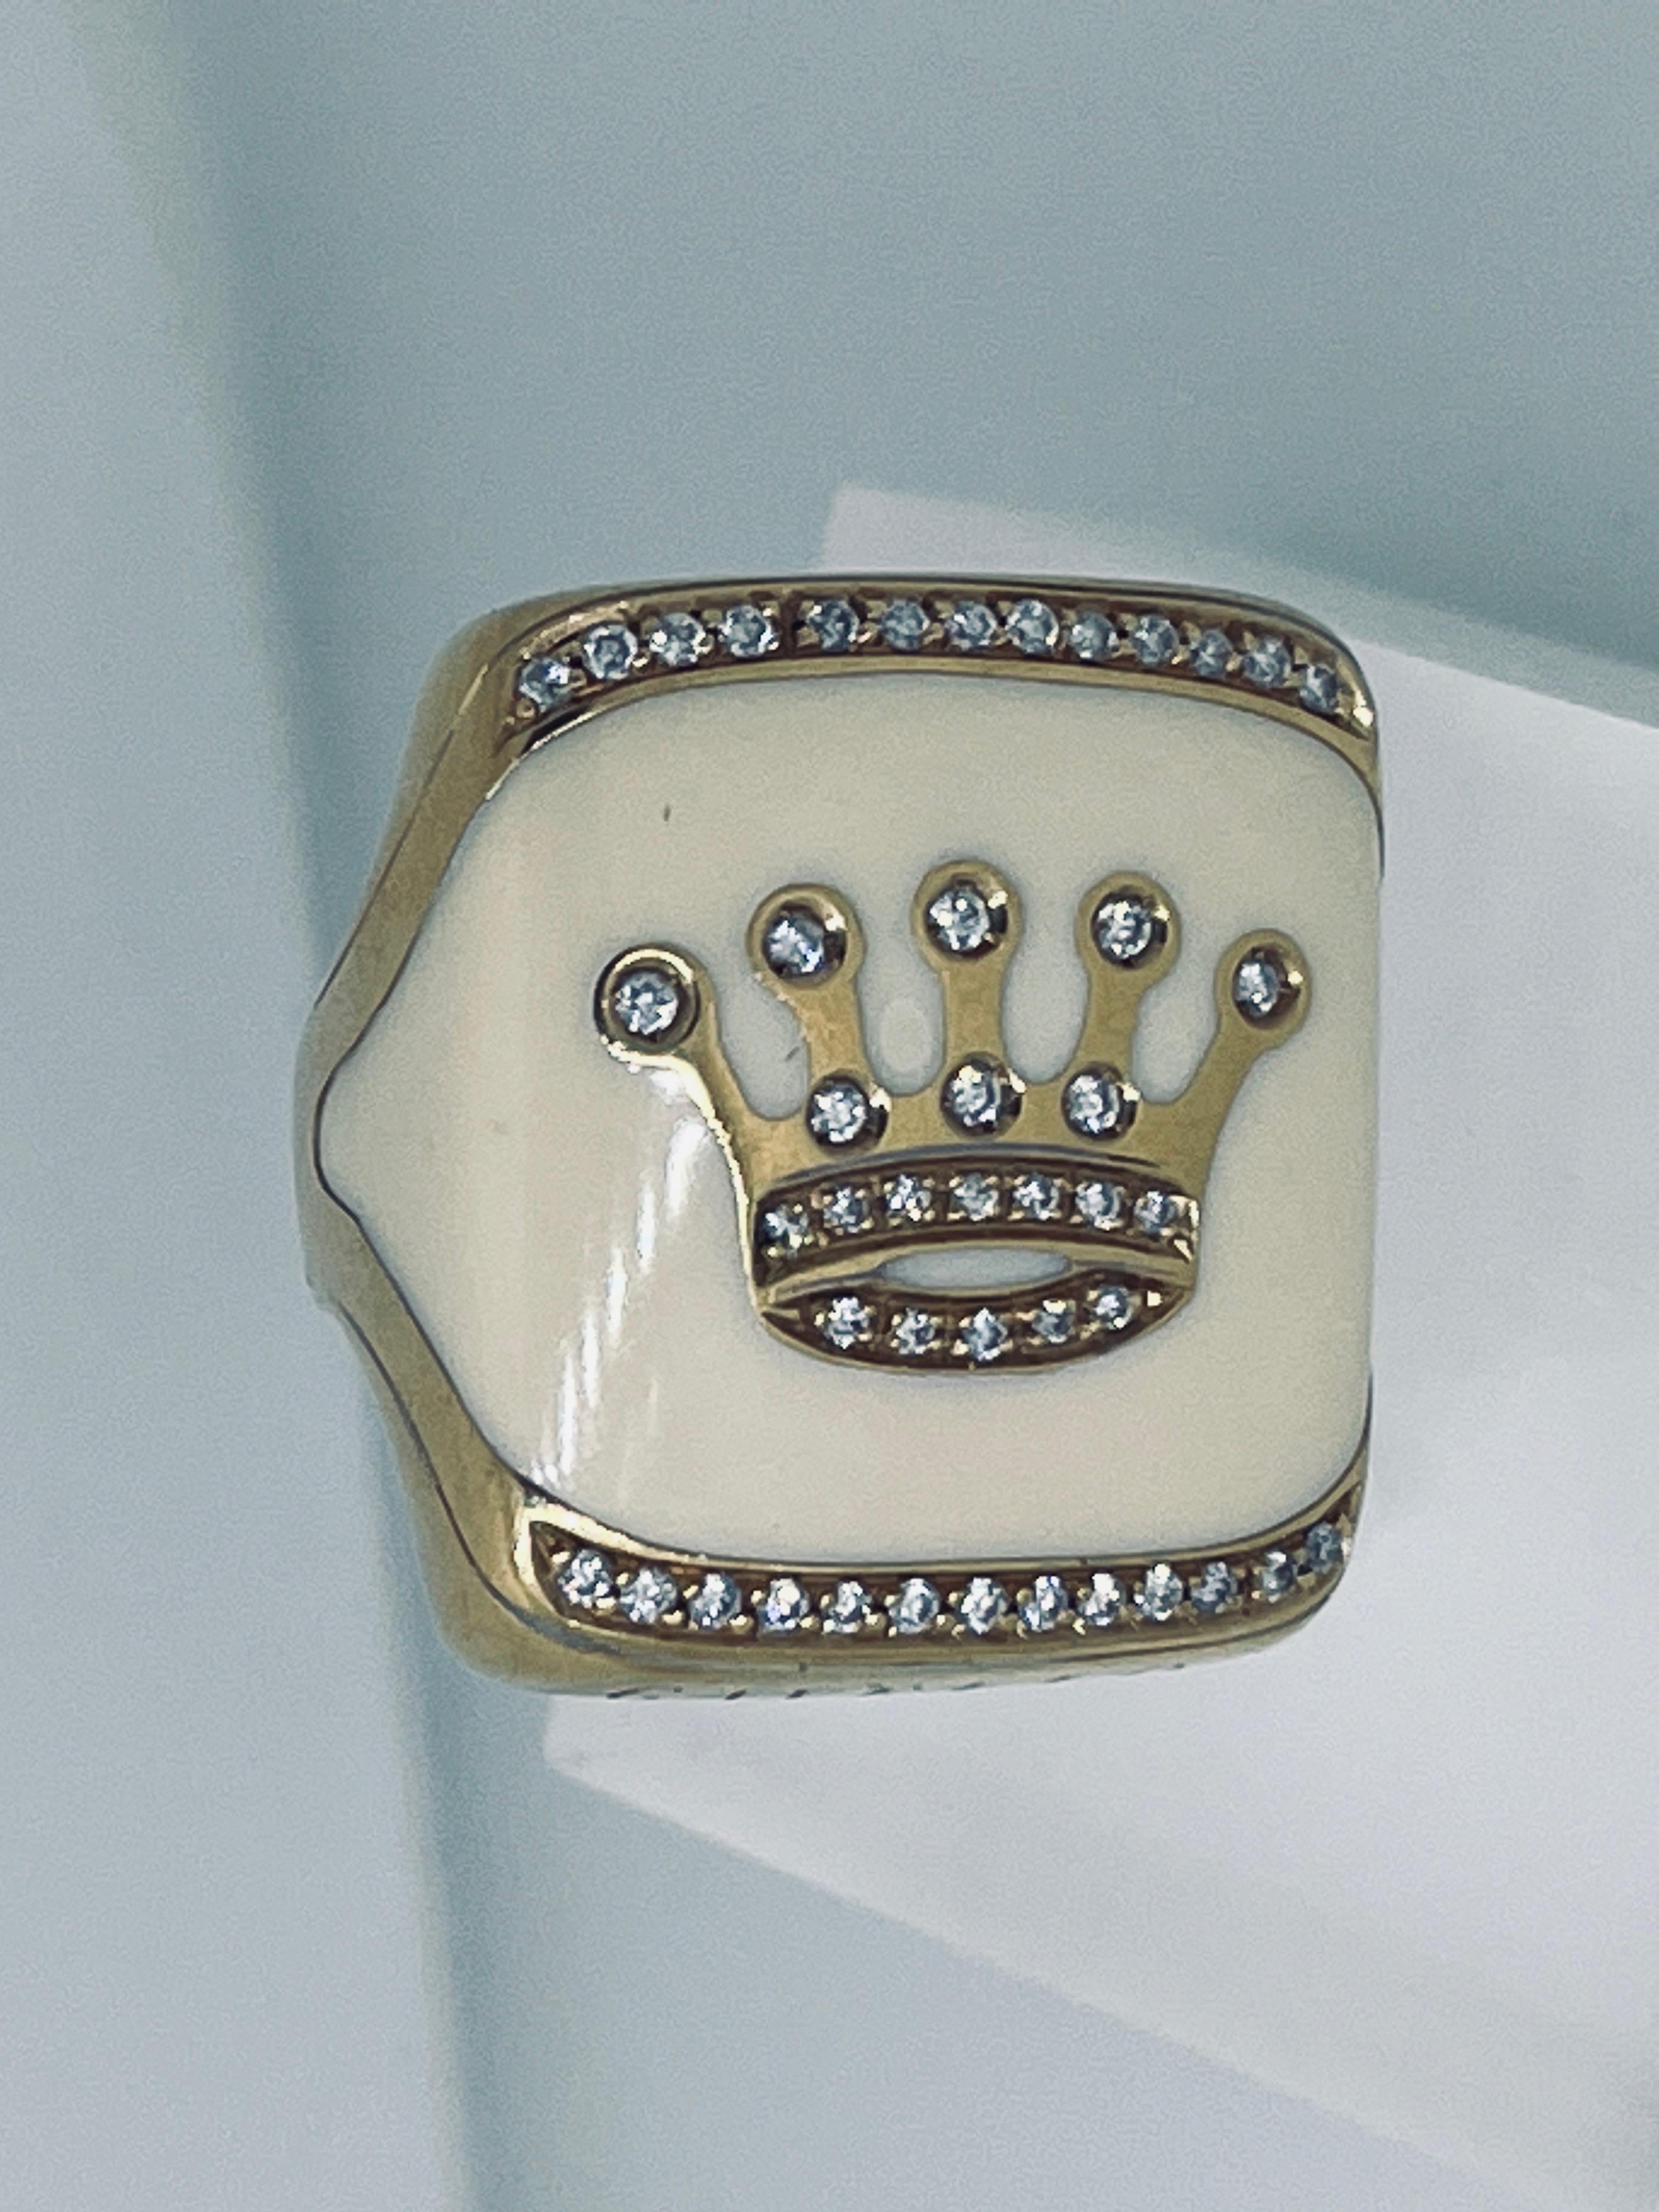 Crown ring in 18ct gold by Gavello (an Italian designer), made with enamel and diamond set aprox. 0.4ct diamonds, total weight 22.7 grammes. Ring is resizable. Size is: K1/2 (UK), 51 (EU), 5.75 (US), 16.1mm (inside ring diameter), 50.6mm (finger